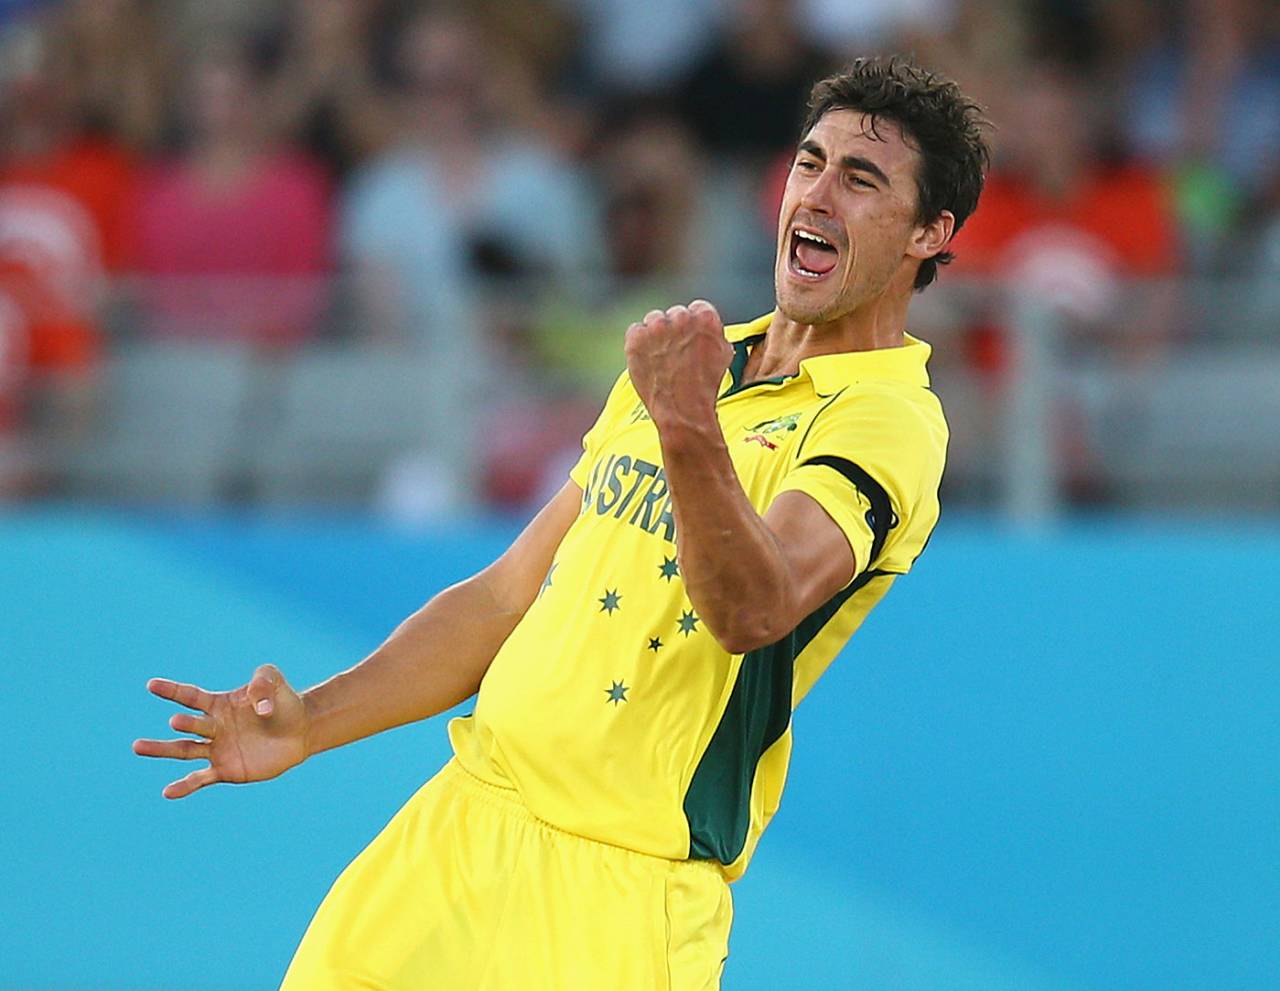 Mitchell Starc has led the way for left-arm pace in this World Cup, taking 16 wickets at an average of 8.50&nbsp;&nbsp;&bull;&nbsp;&nbsp;Getty Images